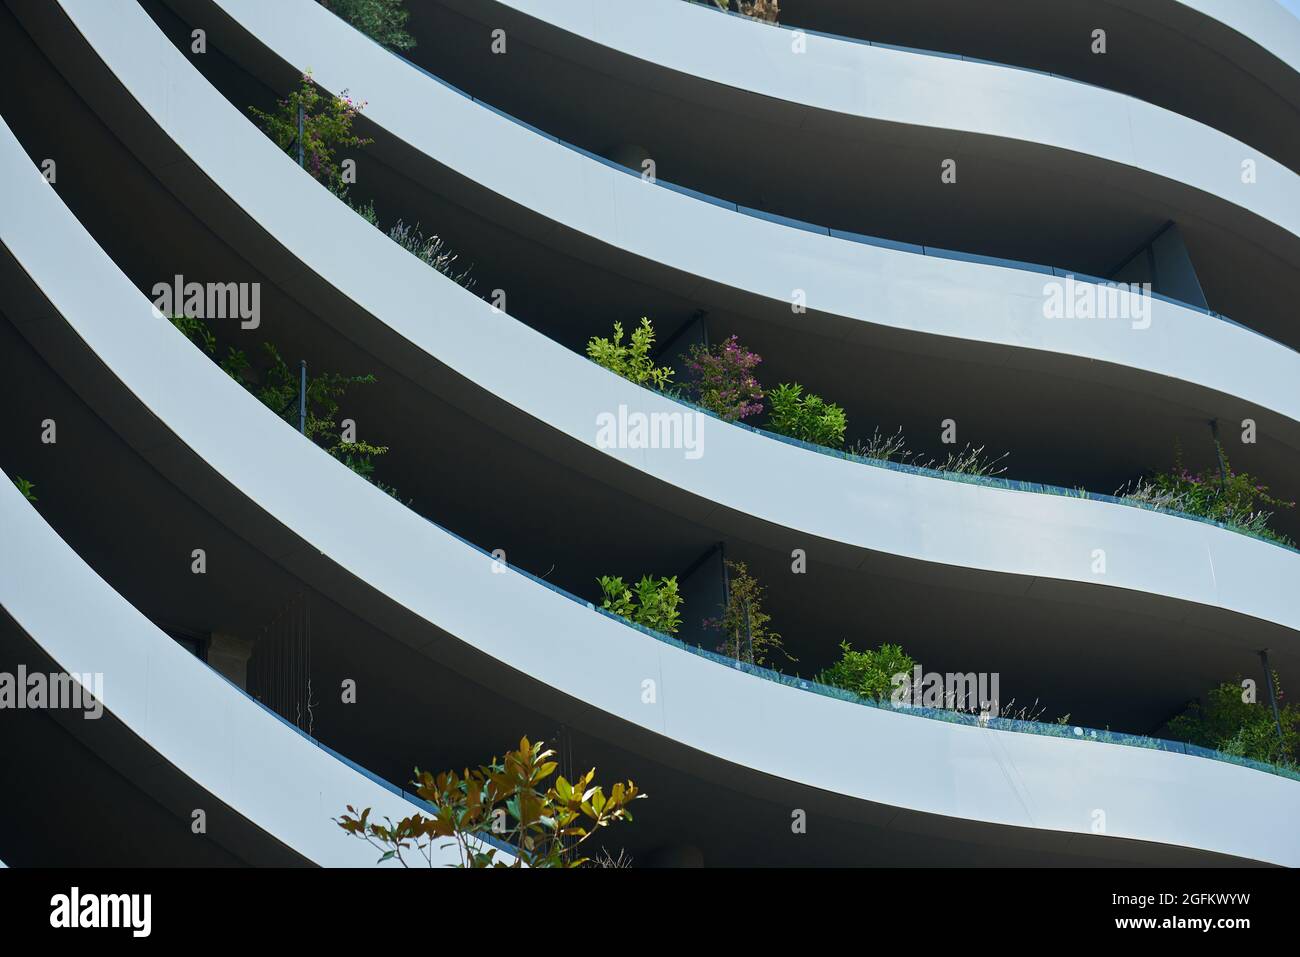 Abstract image of the facade of a modern building in europe with plants Stock Photo